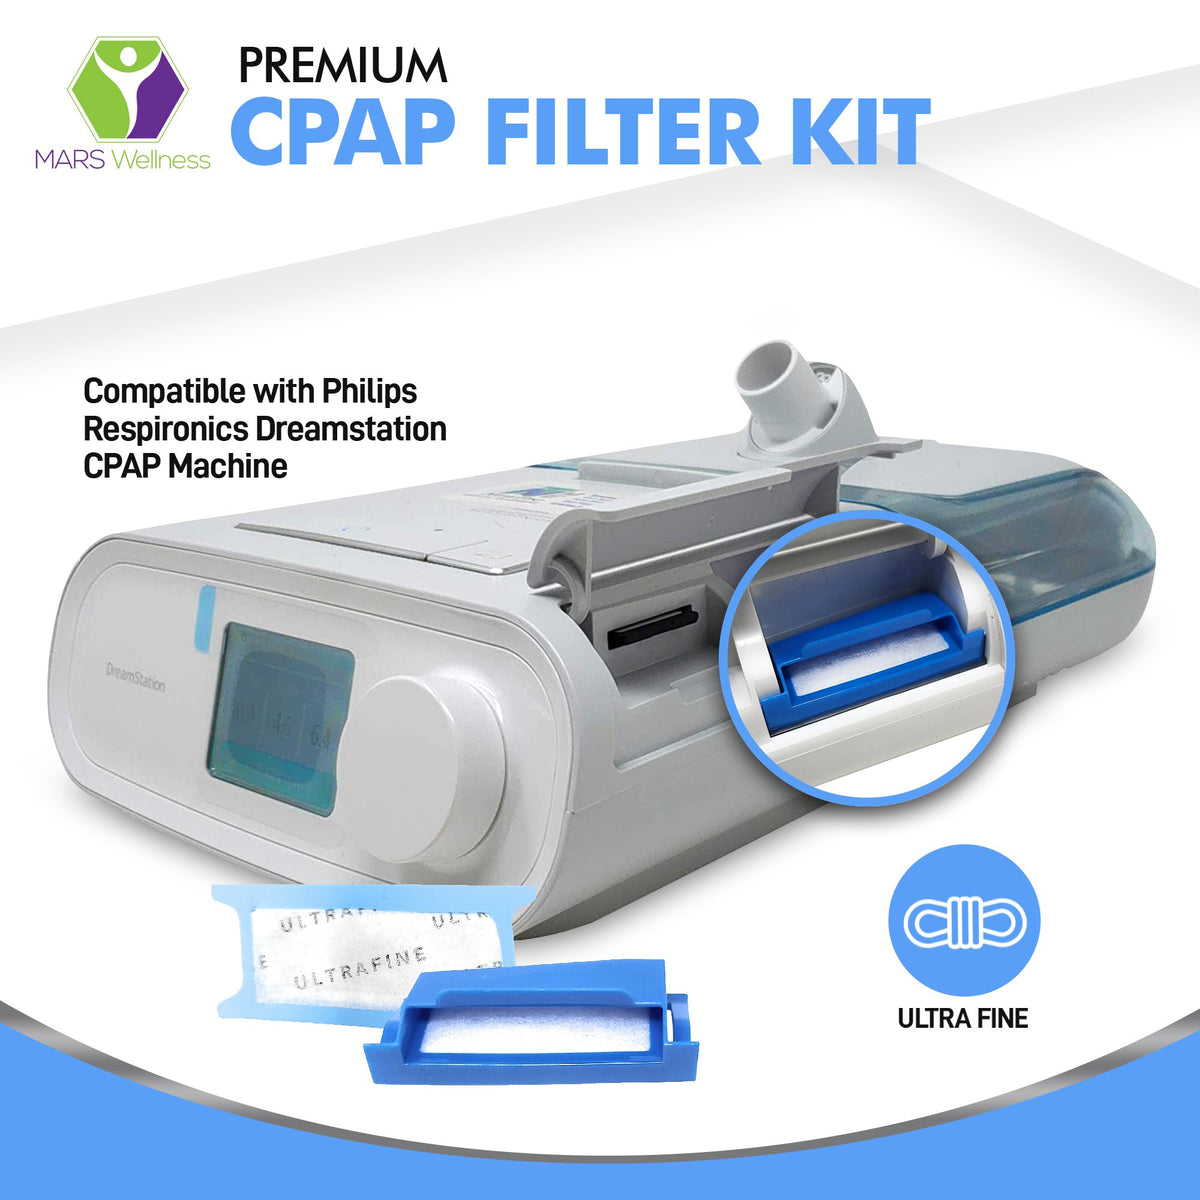 Premium Cpap Filter Kit - Compatible with Philips Respironics Dreamstation CPAP Machine - All-in-1 Combo Pack Includes 4 Standard and 20 Ultra-Fine Filters - Made in The USA (4 Pollen 20 Ultra-Fine) - Mars Med Supply